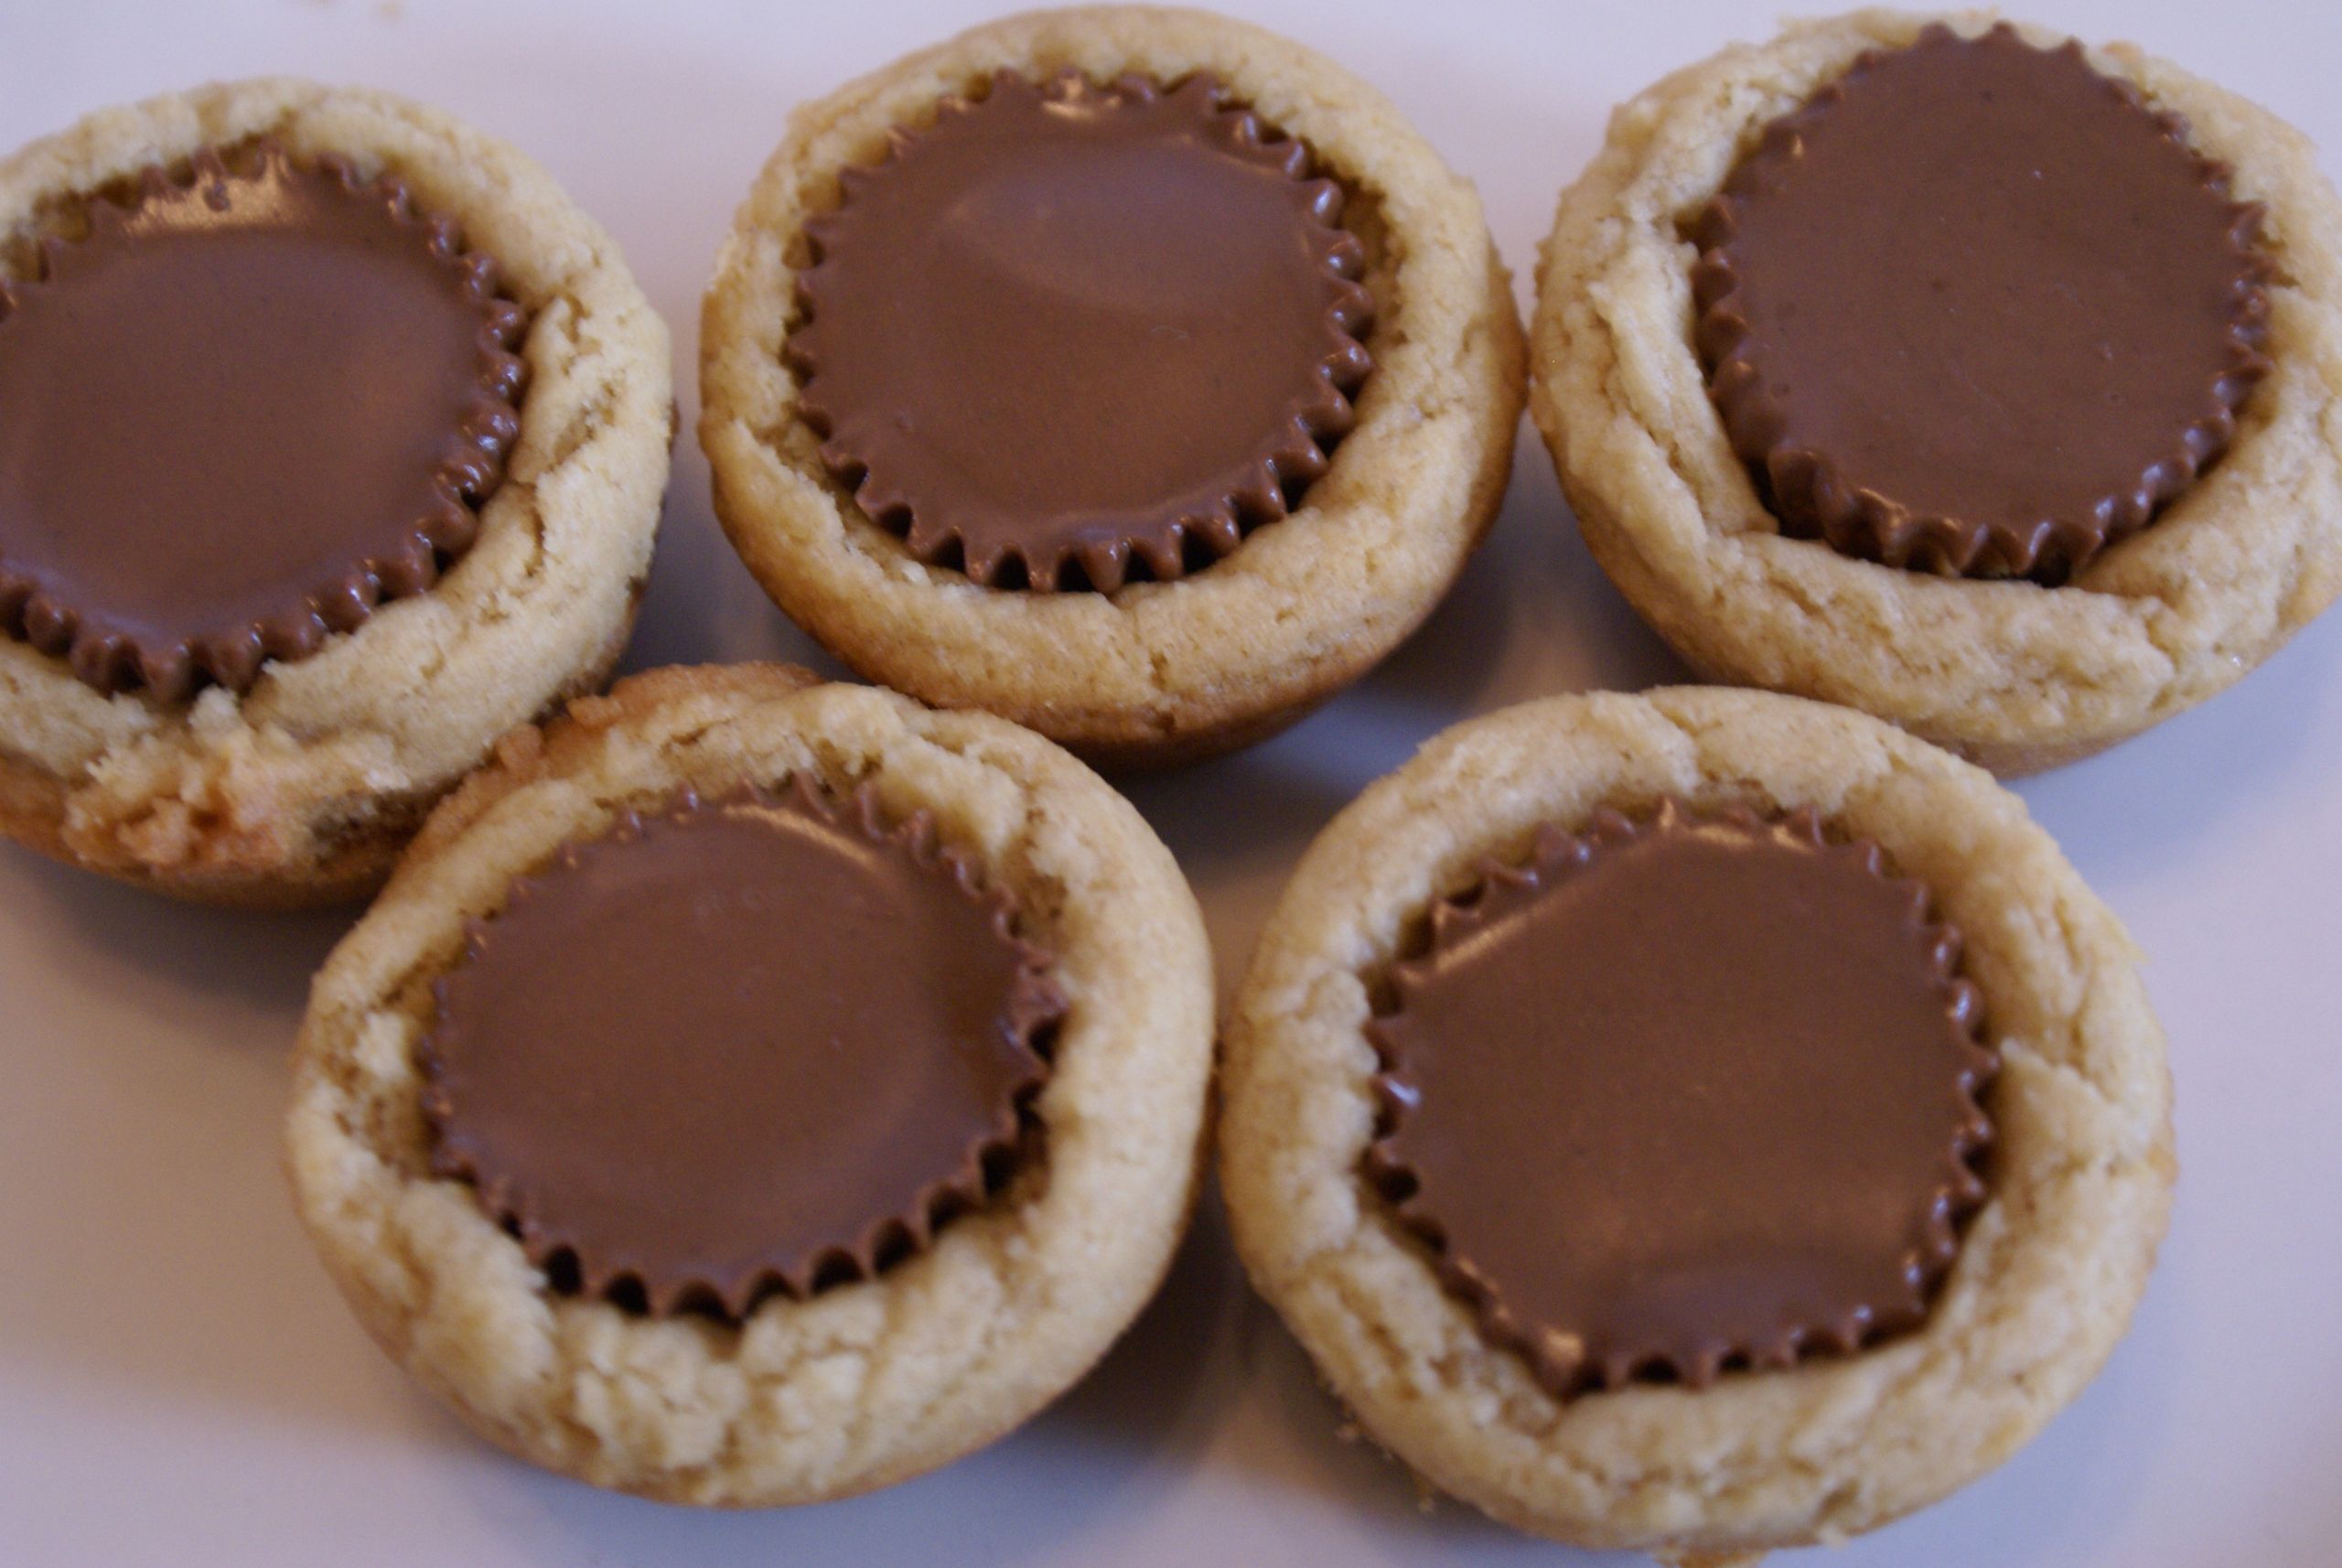 Reese Peanut Butter Cup Cookies
 12 Days of Christmas Cookies 5 Reese’s Peanut Butter Cup